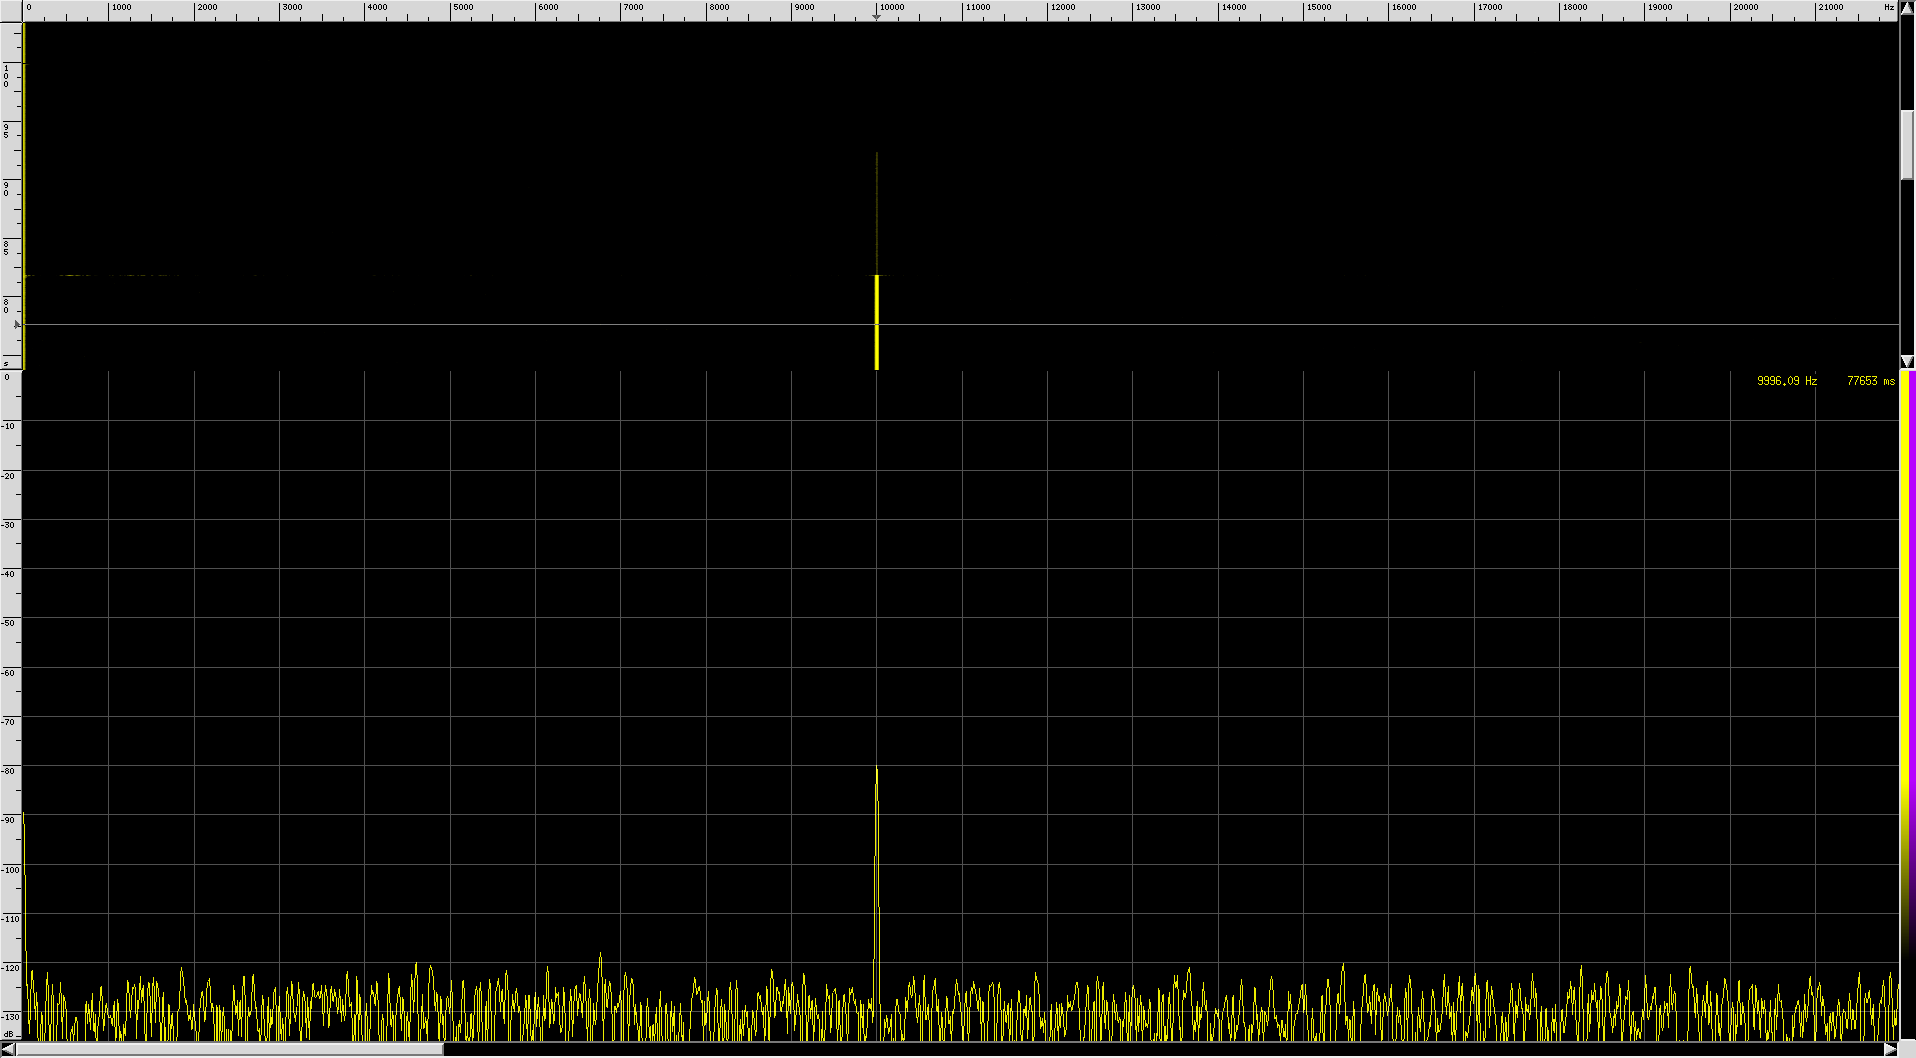 baudline_spectro_preamp_on.png